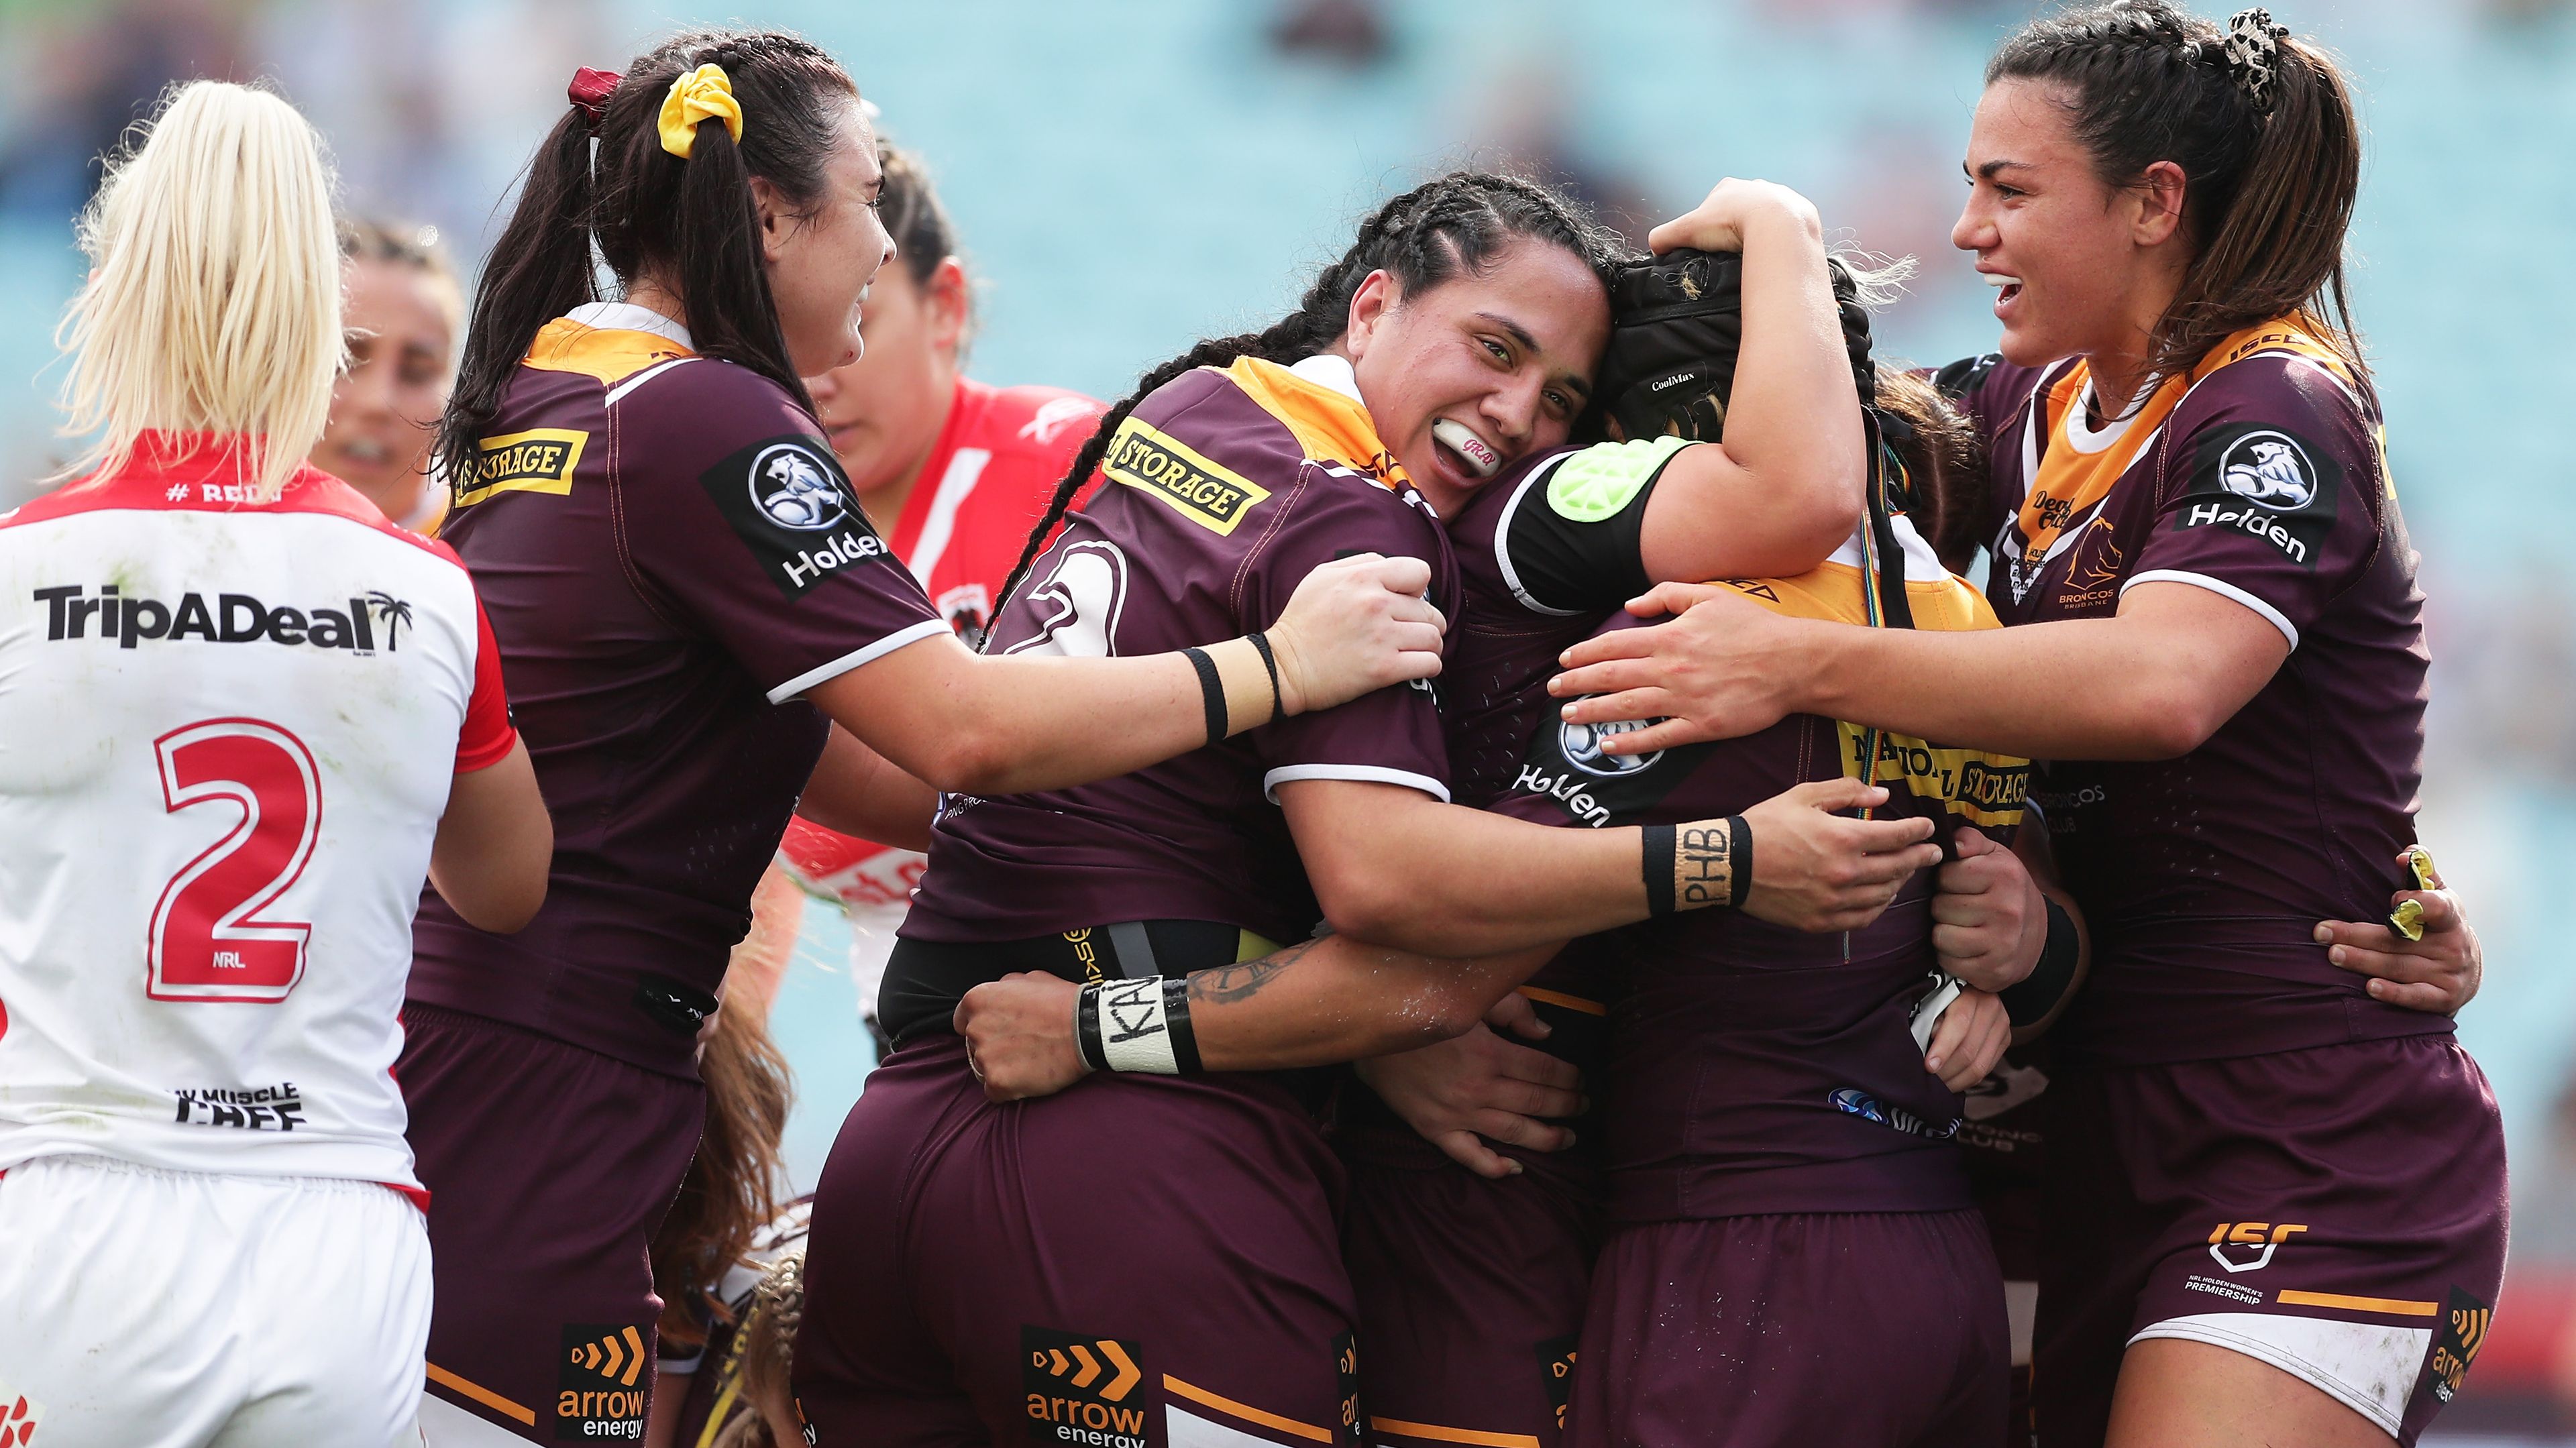 The Broncos celebrate in the NRLW Grand Final.